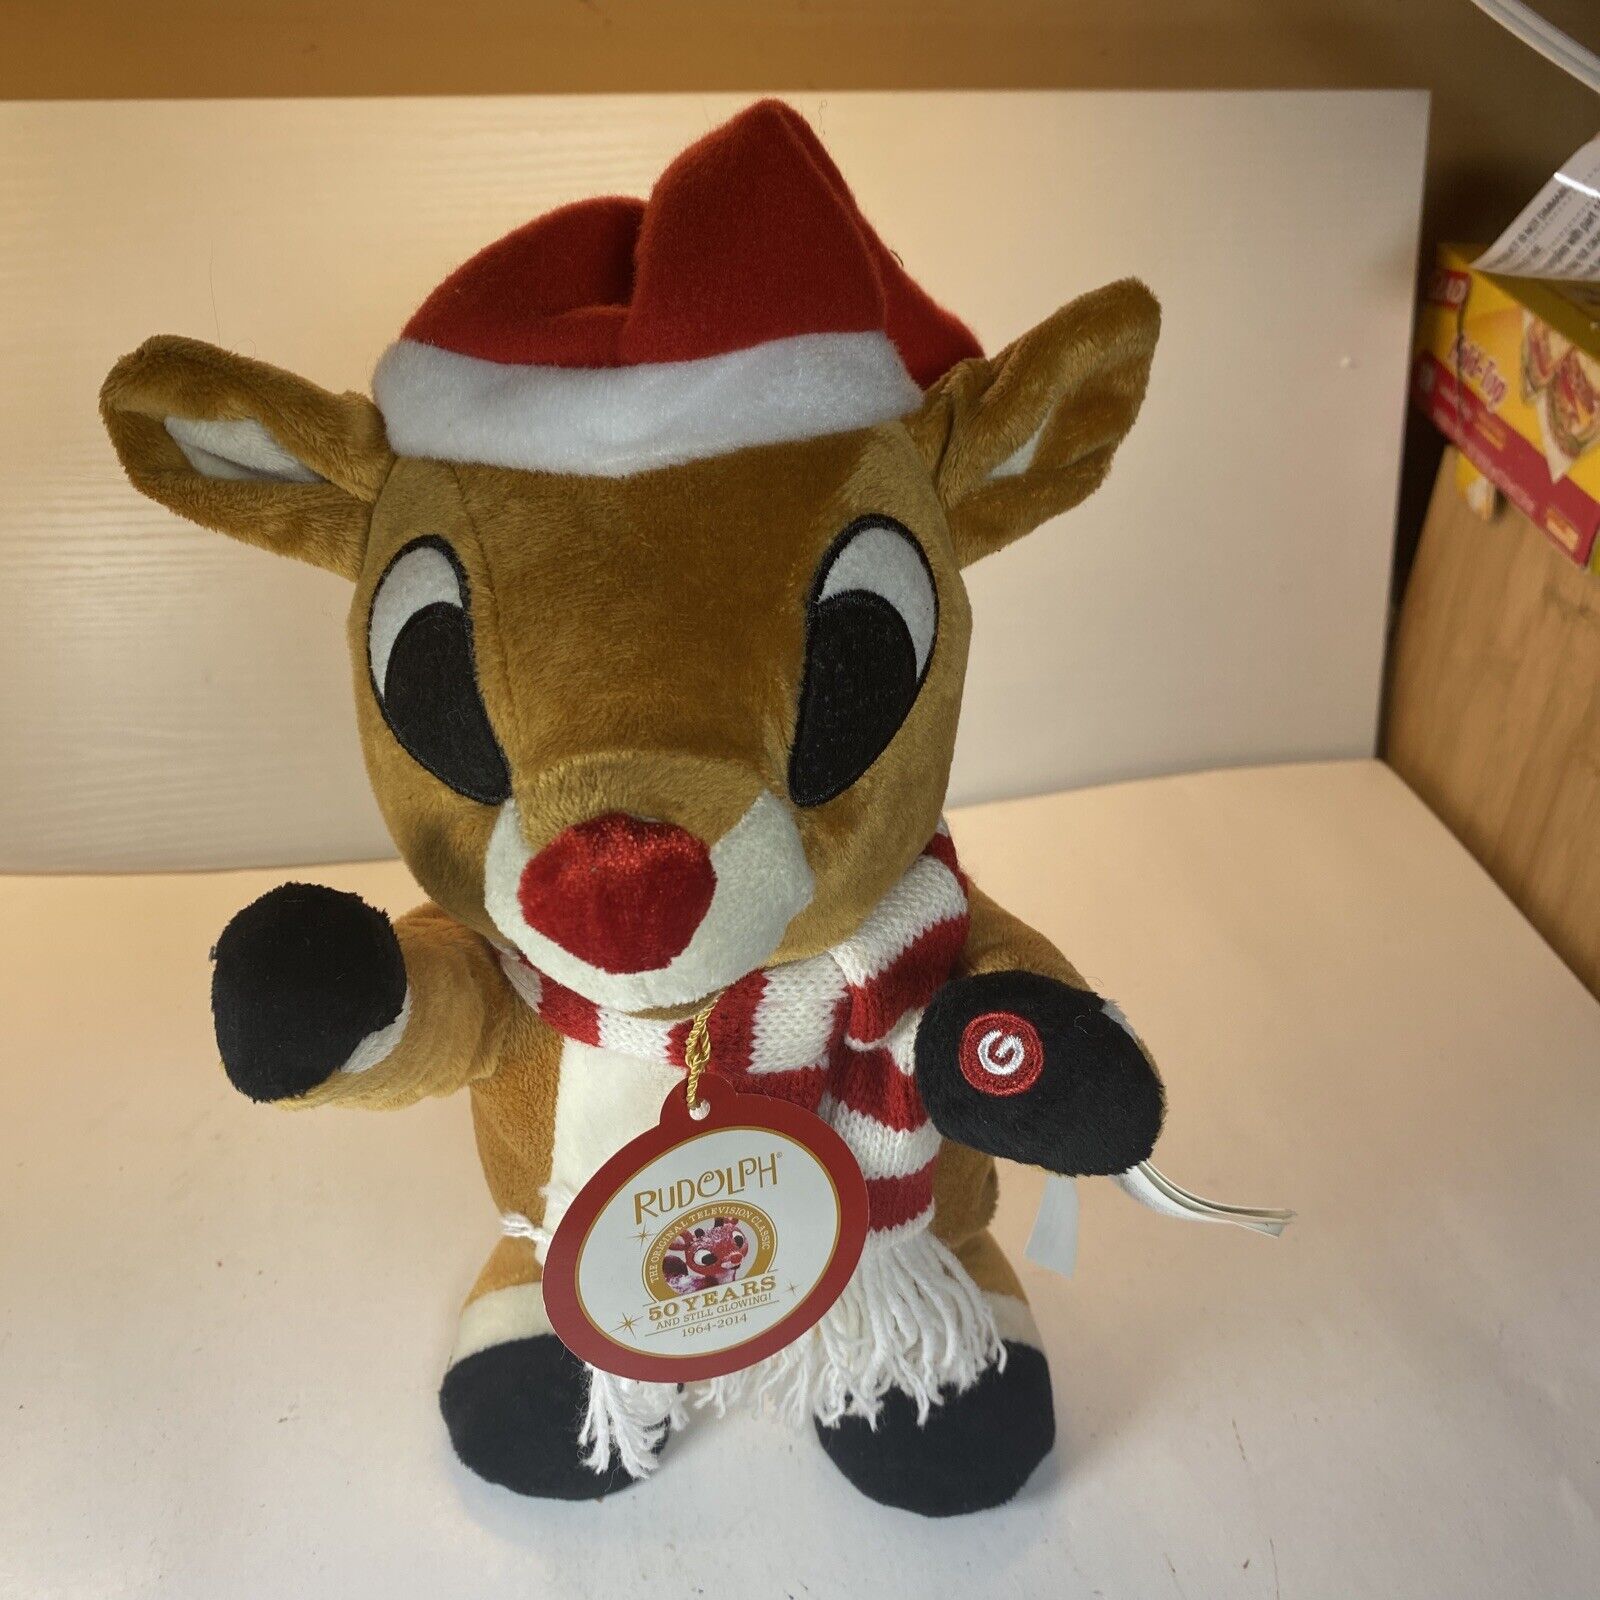 Gemmy Rudolph the Red Nose Reindeer Animated Dancing Plush 2014 50th Anniversary